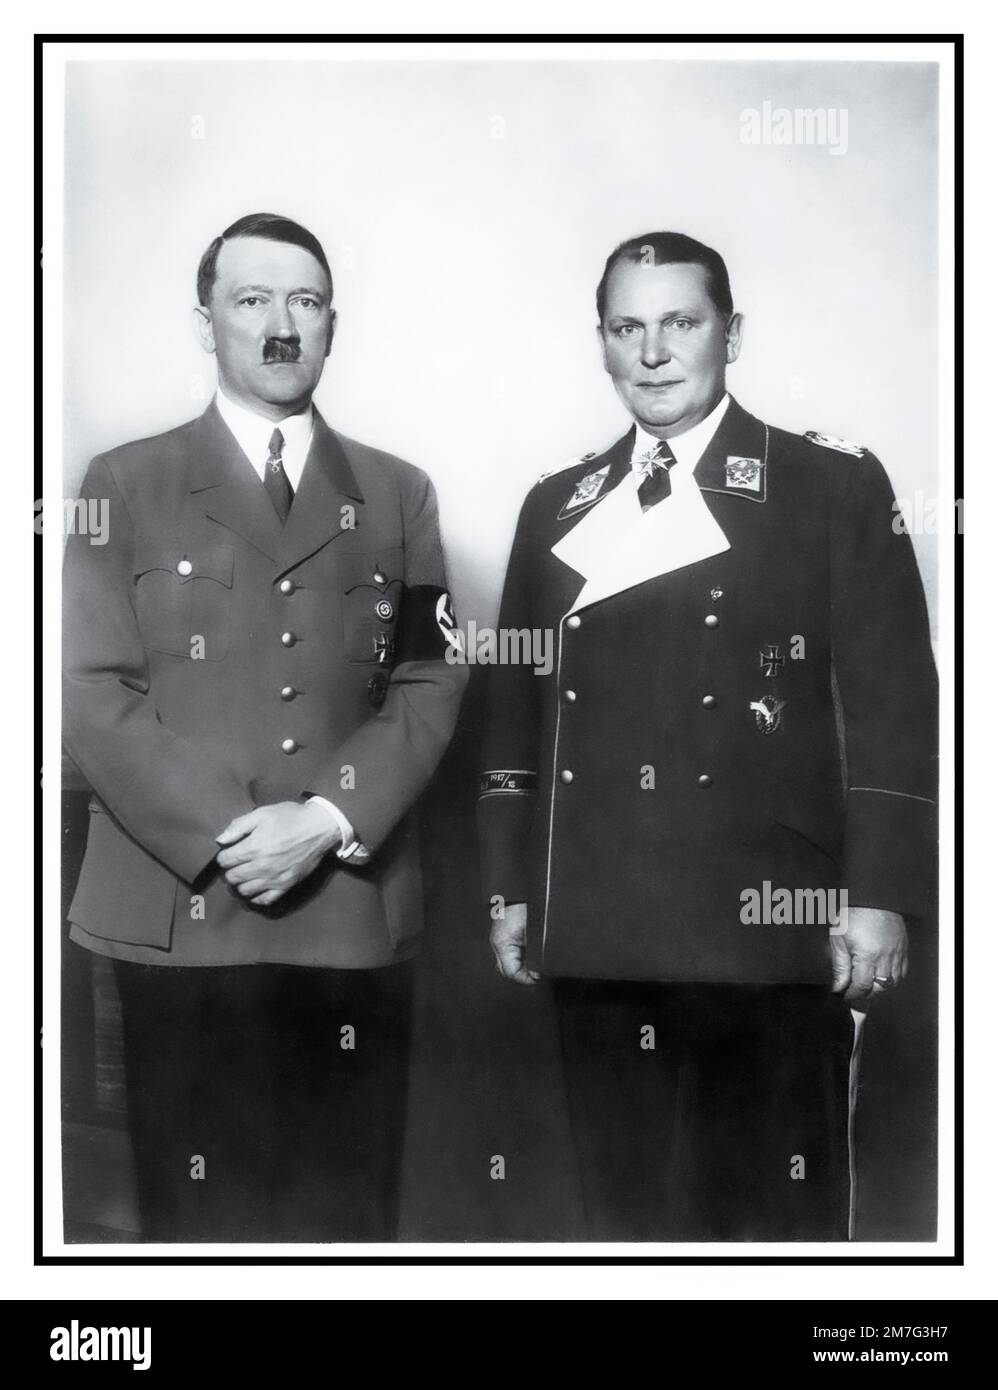 Adolf Hitler and Hermann Goering in uniform 1930s posing together for a formal half length portrait by photographer Heinrich Hoffmann Stock Photo